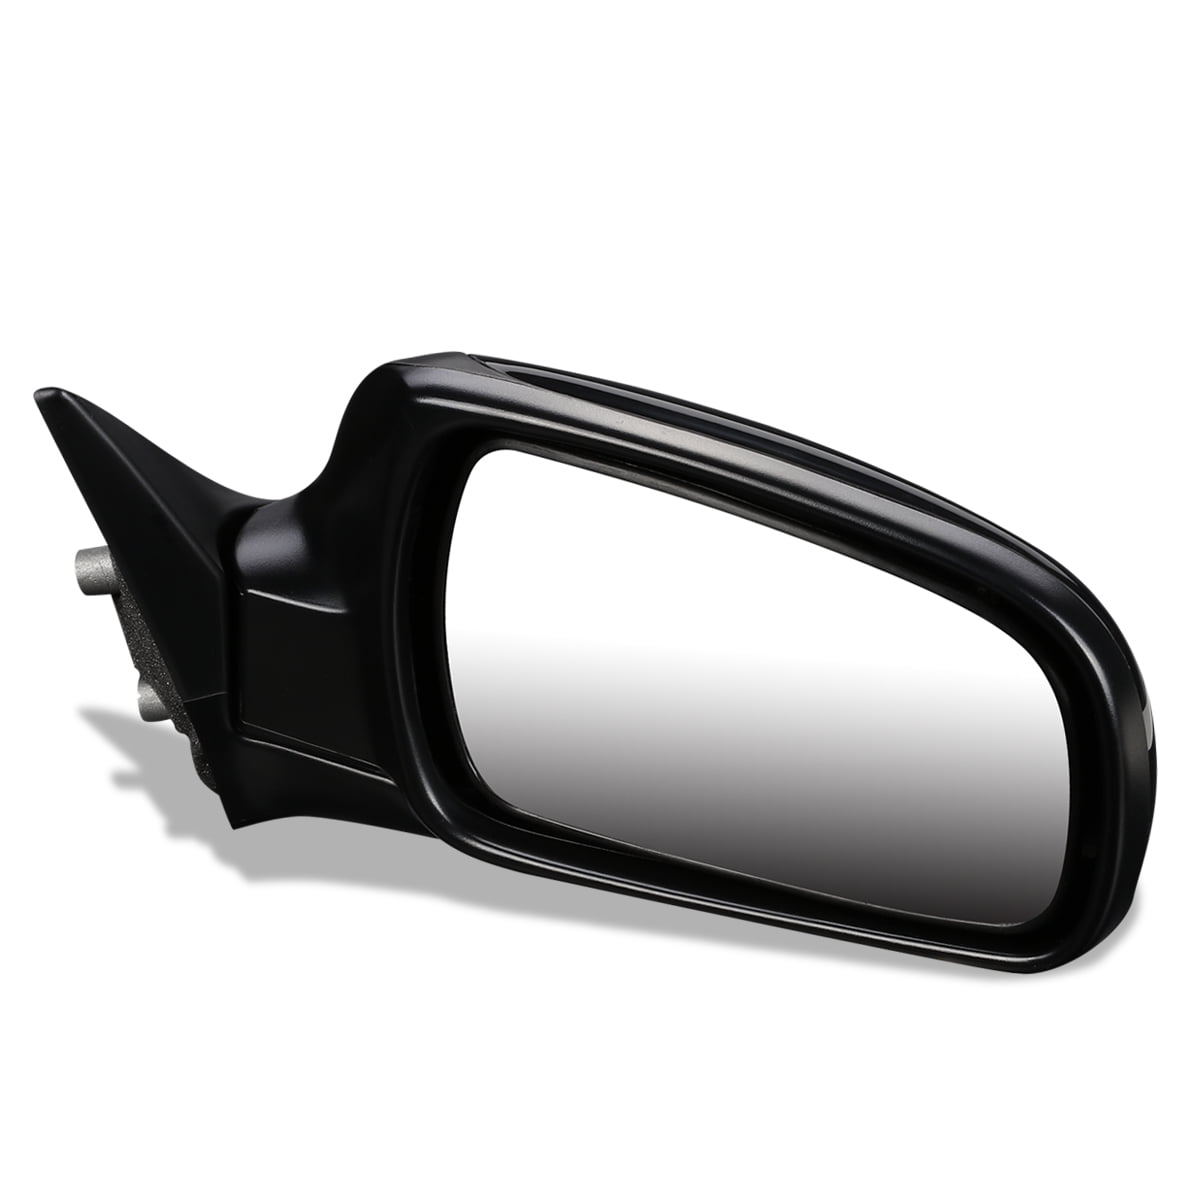 DNA Motoring OEM-MR-NI1321112 For 1996 to 1999 Nissan Maxima Infiniti I30  OE Style Powered Passenger / Right Side View Door Mirror K630153U01 97 98